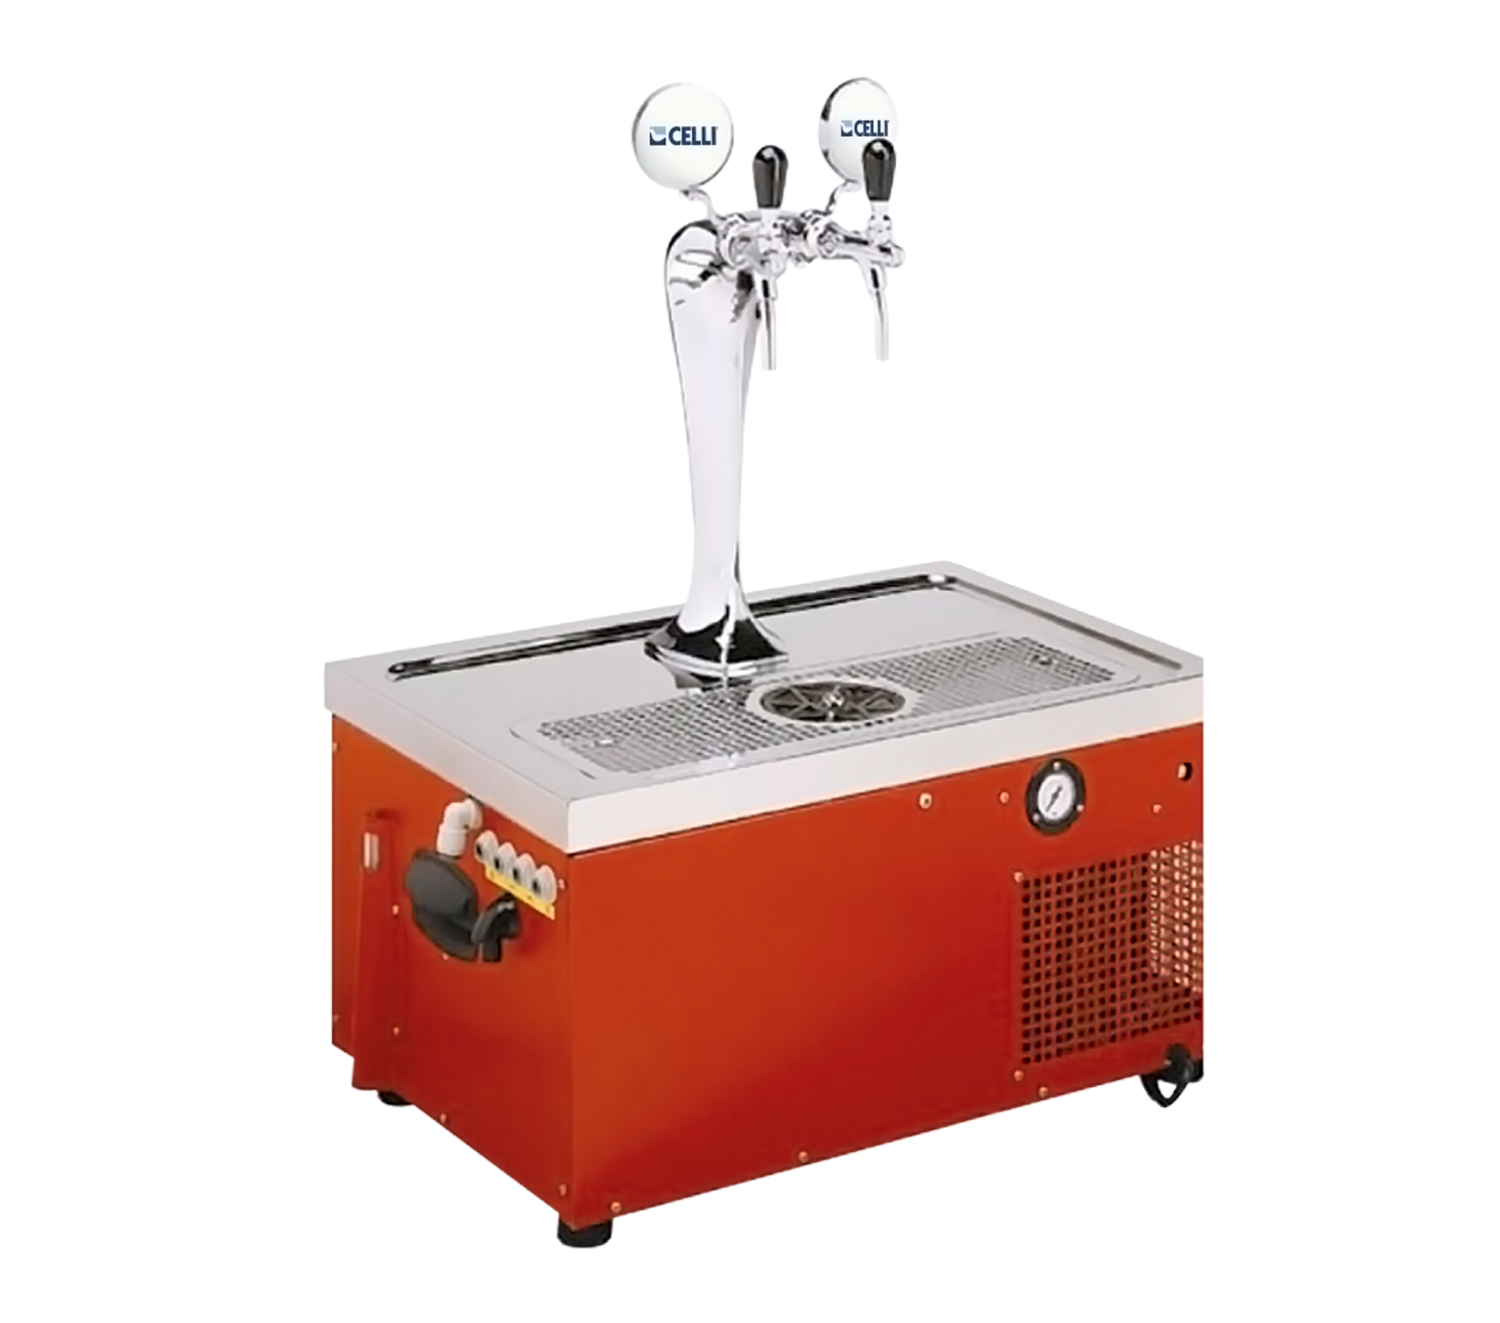 CELLI Sting - Draught beer equipment & dispensers